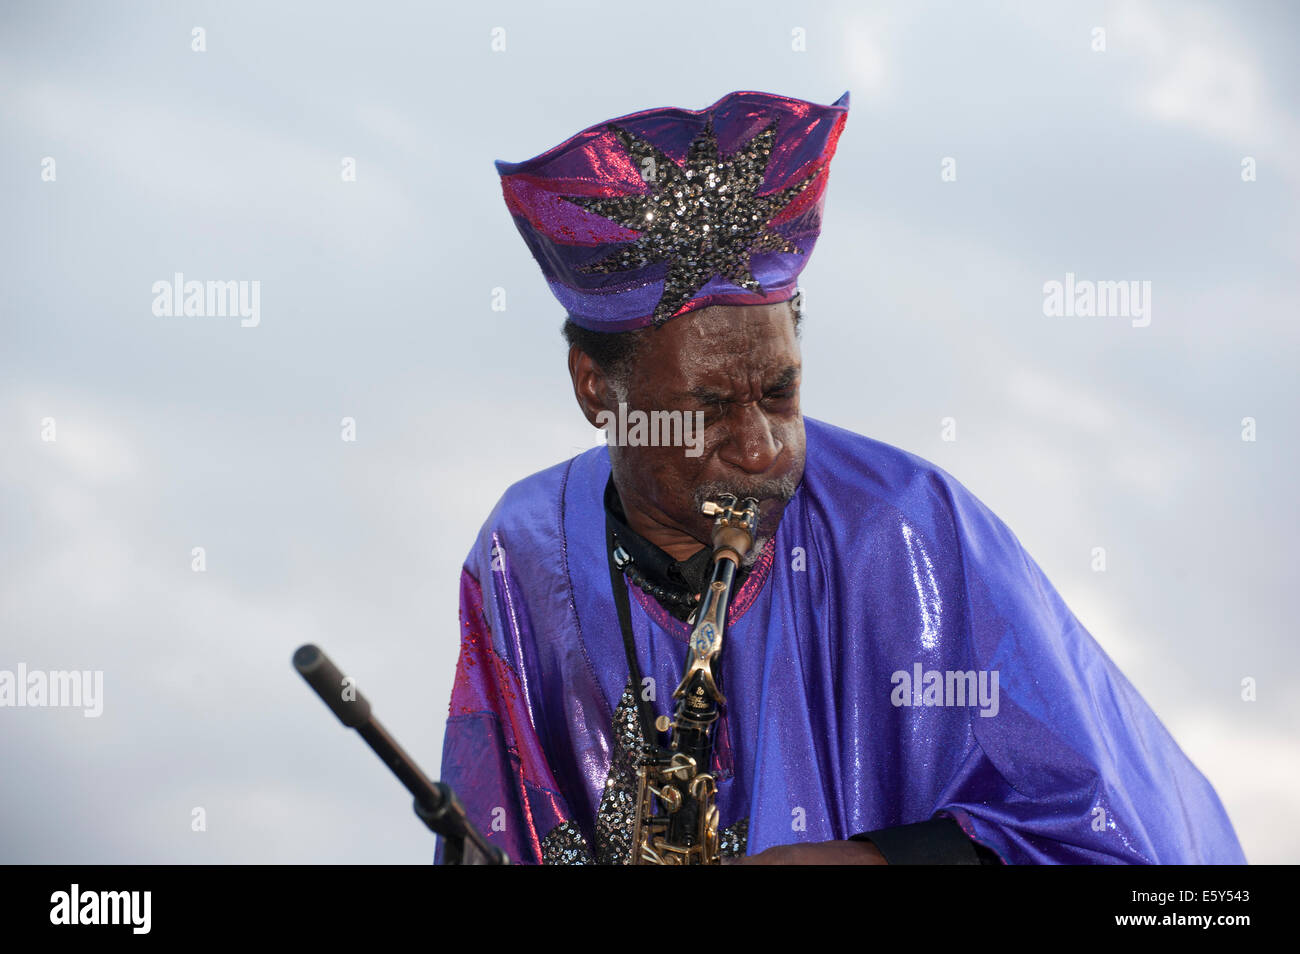 New York, USA. 7th August, 2014.  Knoel Scott, a musician with the Sun Ra Arkestra, which played a jazz concert in a Battery Park City park next to the Hudson River on Aug. 7, 2014. This year marks the 100th birthday of Sun Ra, the Arkestra's founder Credit: © Terese Loeb Kreuzer/Alamy Live News  Stock Photo